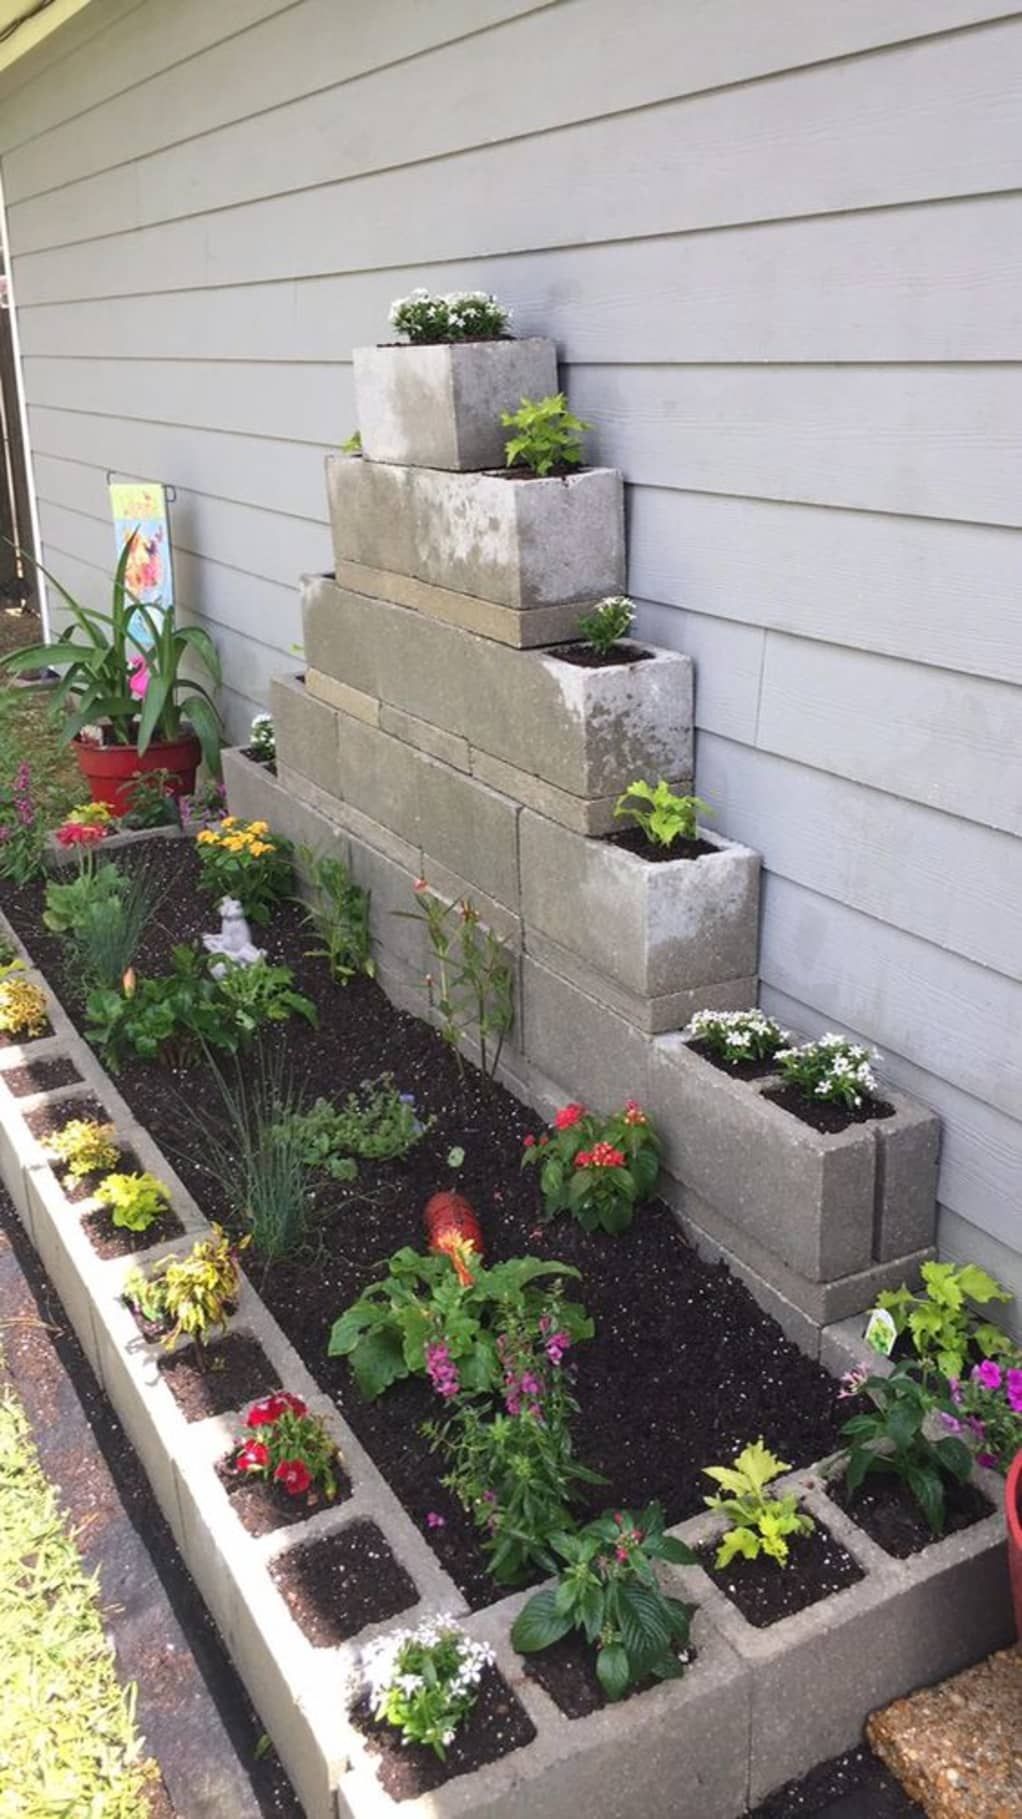 Creative Ways to Make Your Own Garden Planters at Home